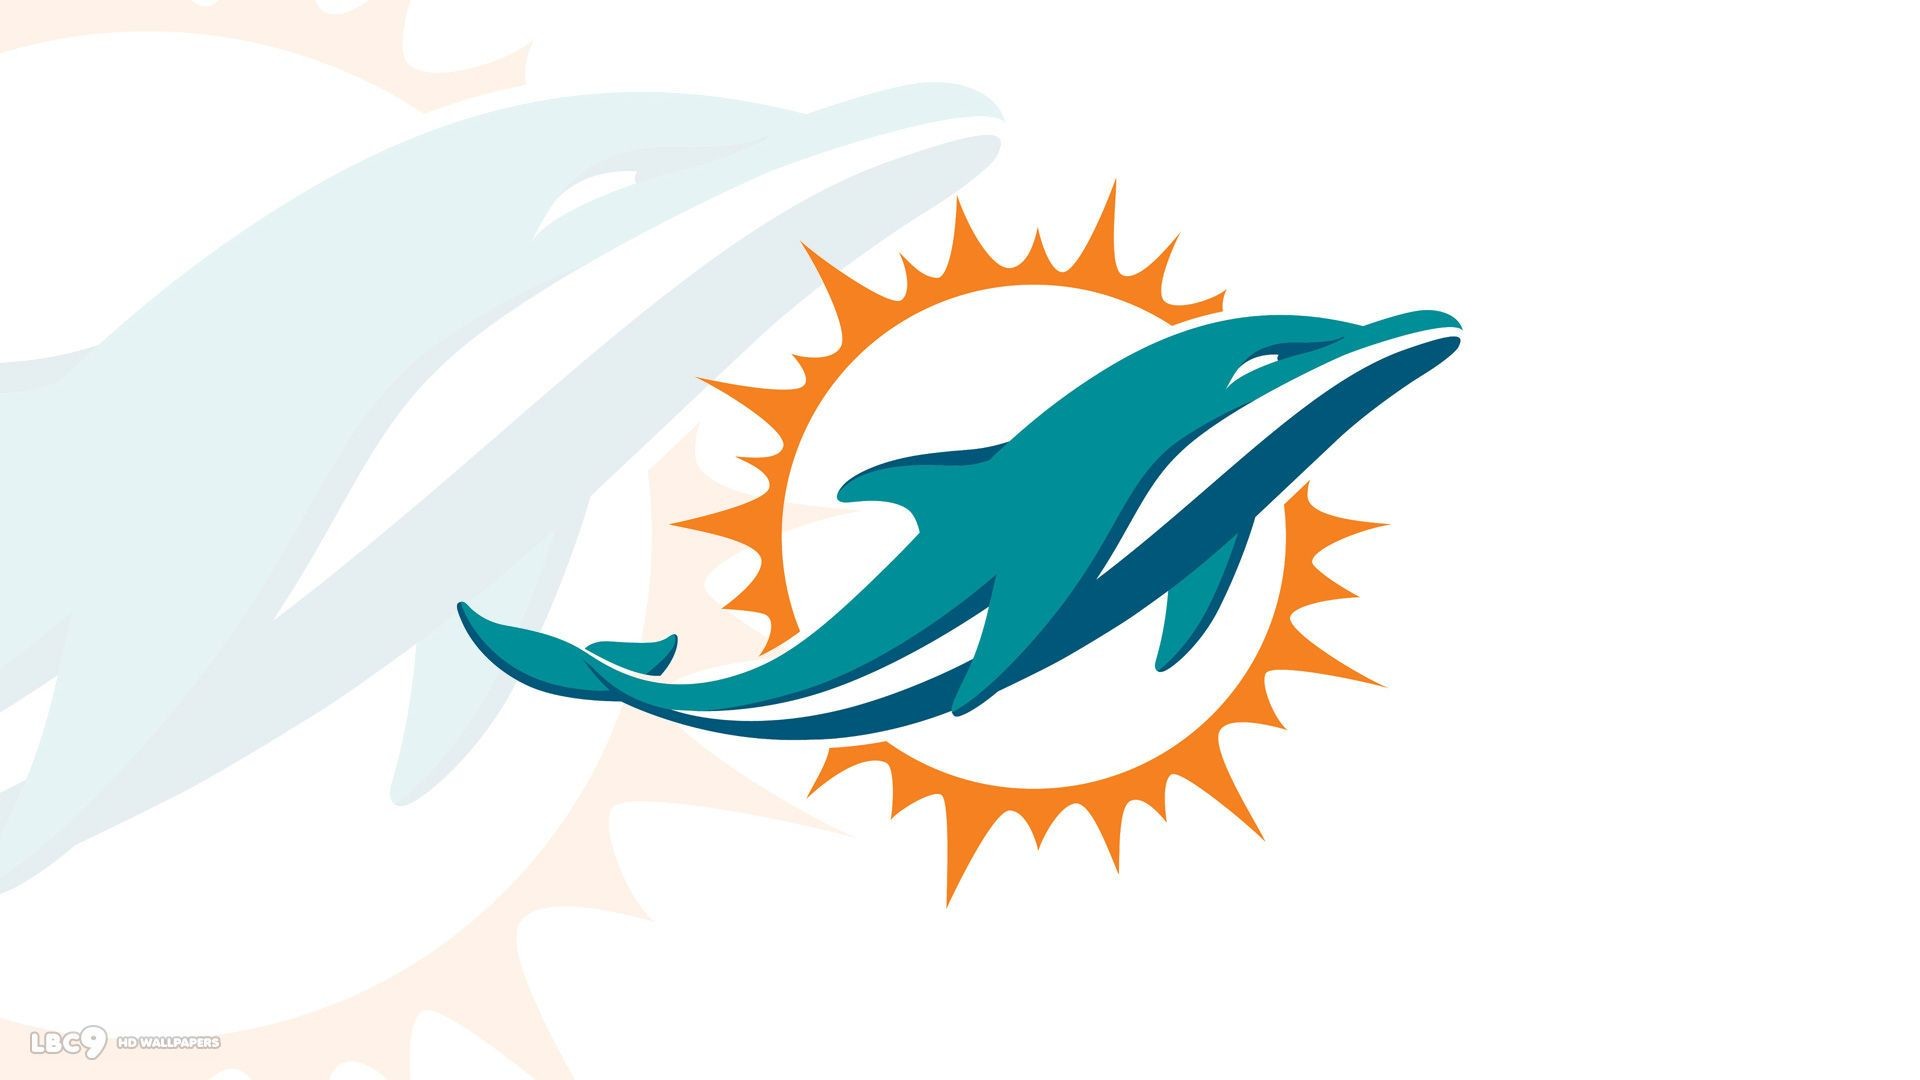 200 Miami Dolphins Wallpapers  Wallpaperscom